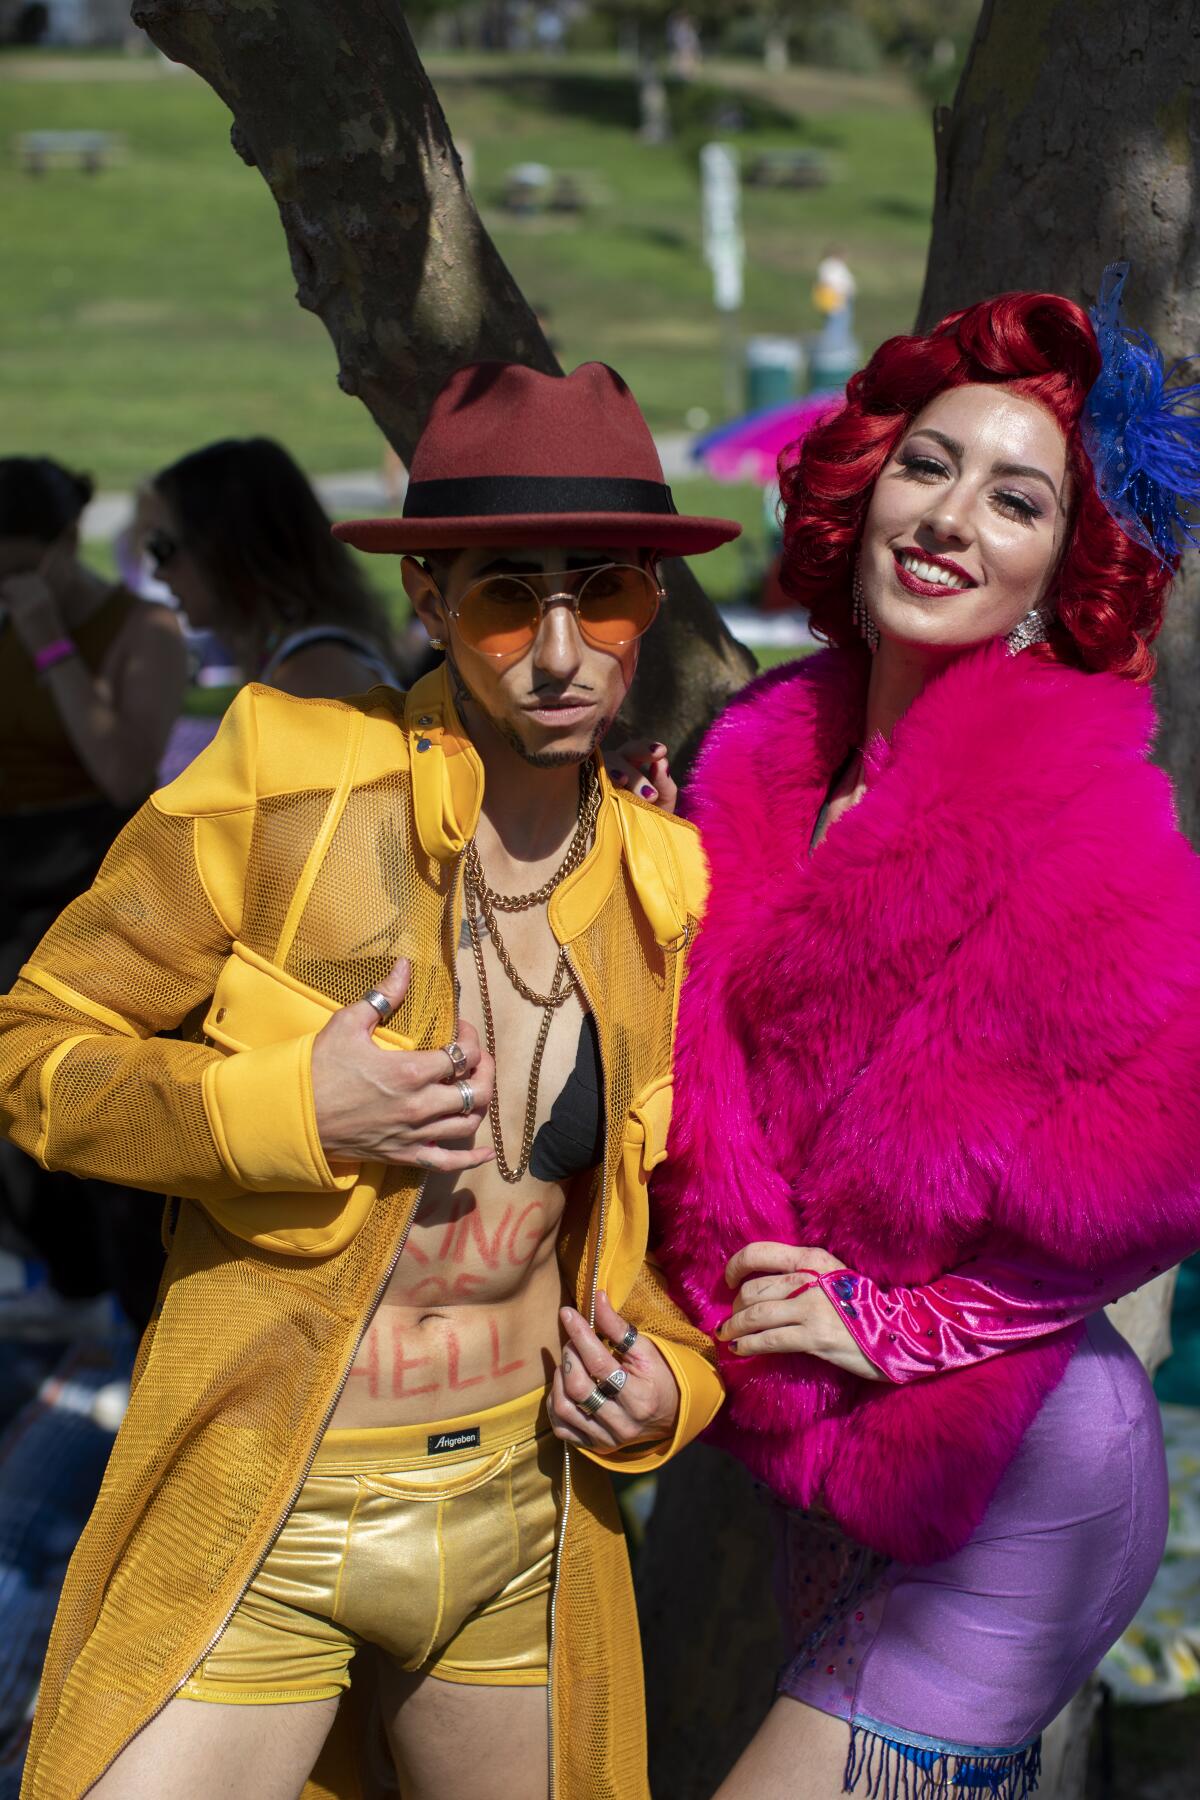 A person in a yellow jacket and boxers and brown cowboy hat, next to a person in purple spandex skirt and pink furry jacket